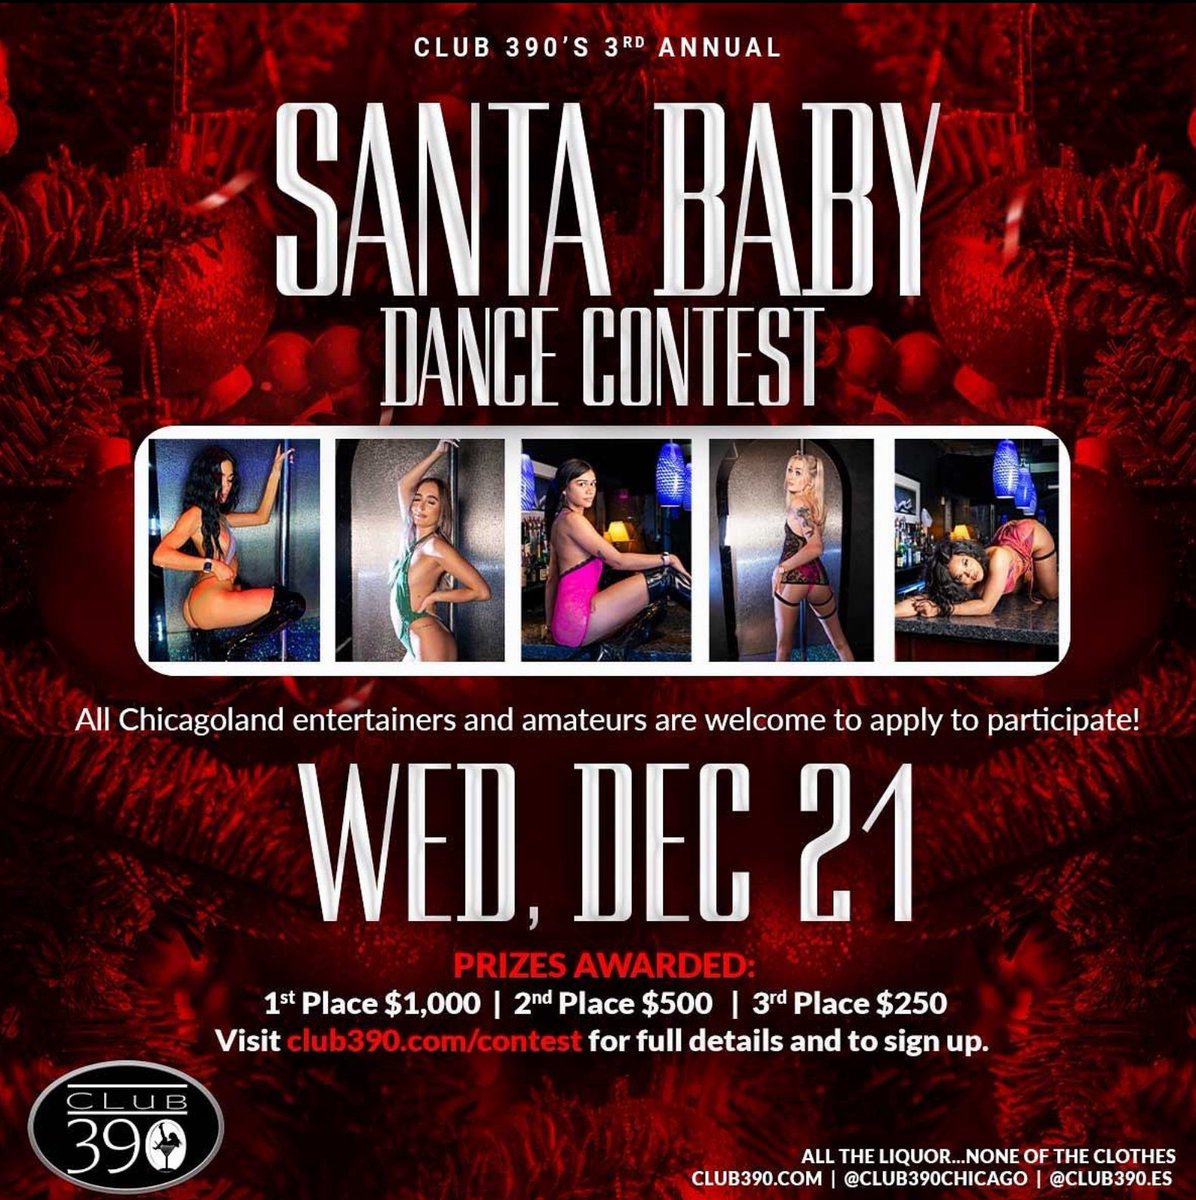 Ohh #SantaBaby, hurry down my #StripperPole tonight! Yes, there's a Santa Baby #DanceContest tonight (21st Dec) at @Club390.

USA #StripClub events like this, & many Xmas parties, are listed on our website: stripclubexperience.com/StripClubEvent…

#Club390 #ChicagoHeights #Chicago #Illinois